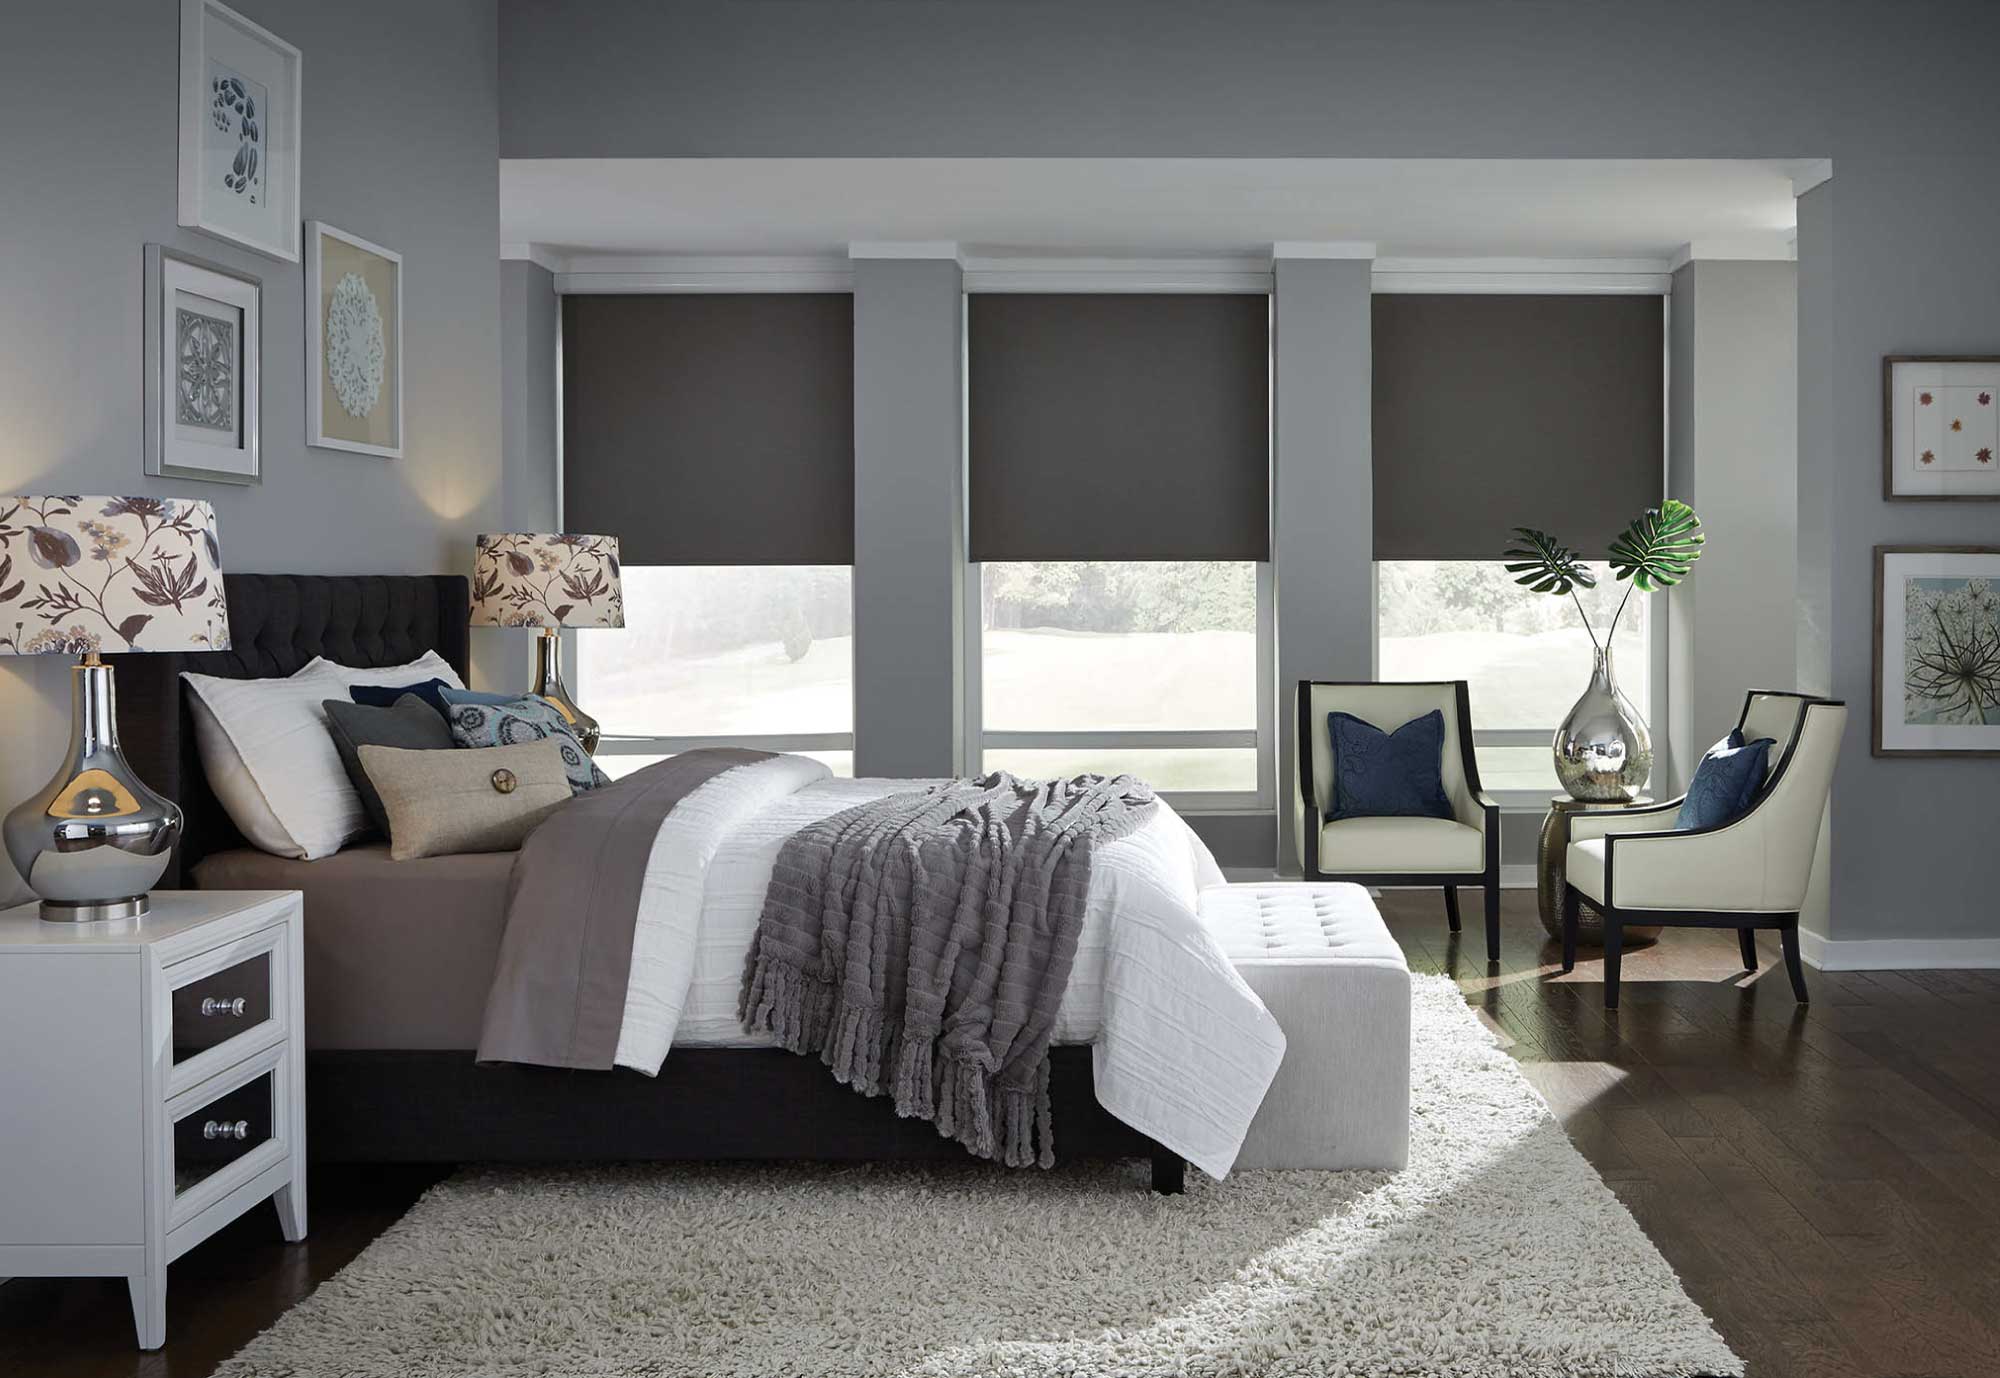 Window shades to help with energy efficiency in home